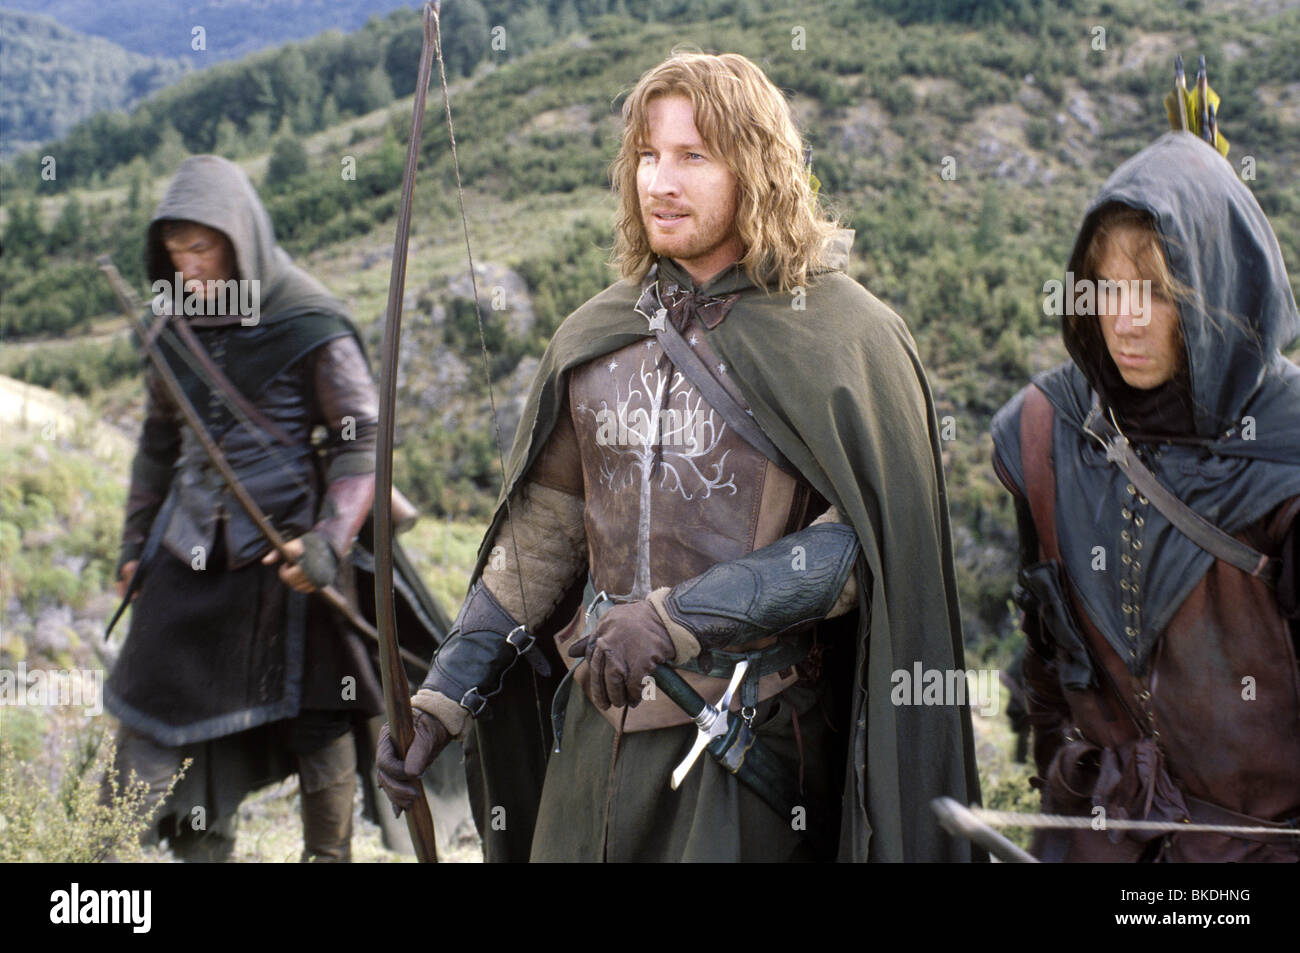 THE LORD OF THE RINGS: THE TWO TOWERS (2002) DAVID WENHAM, FARAMIR TWRS 002 584 Stock Photo